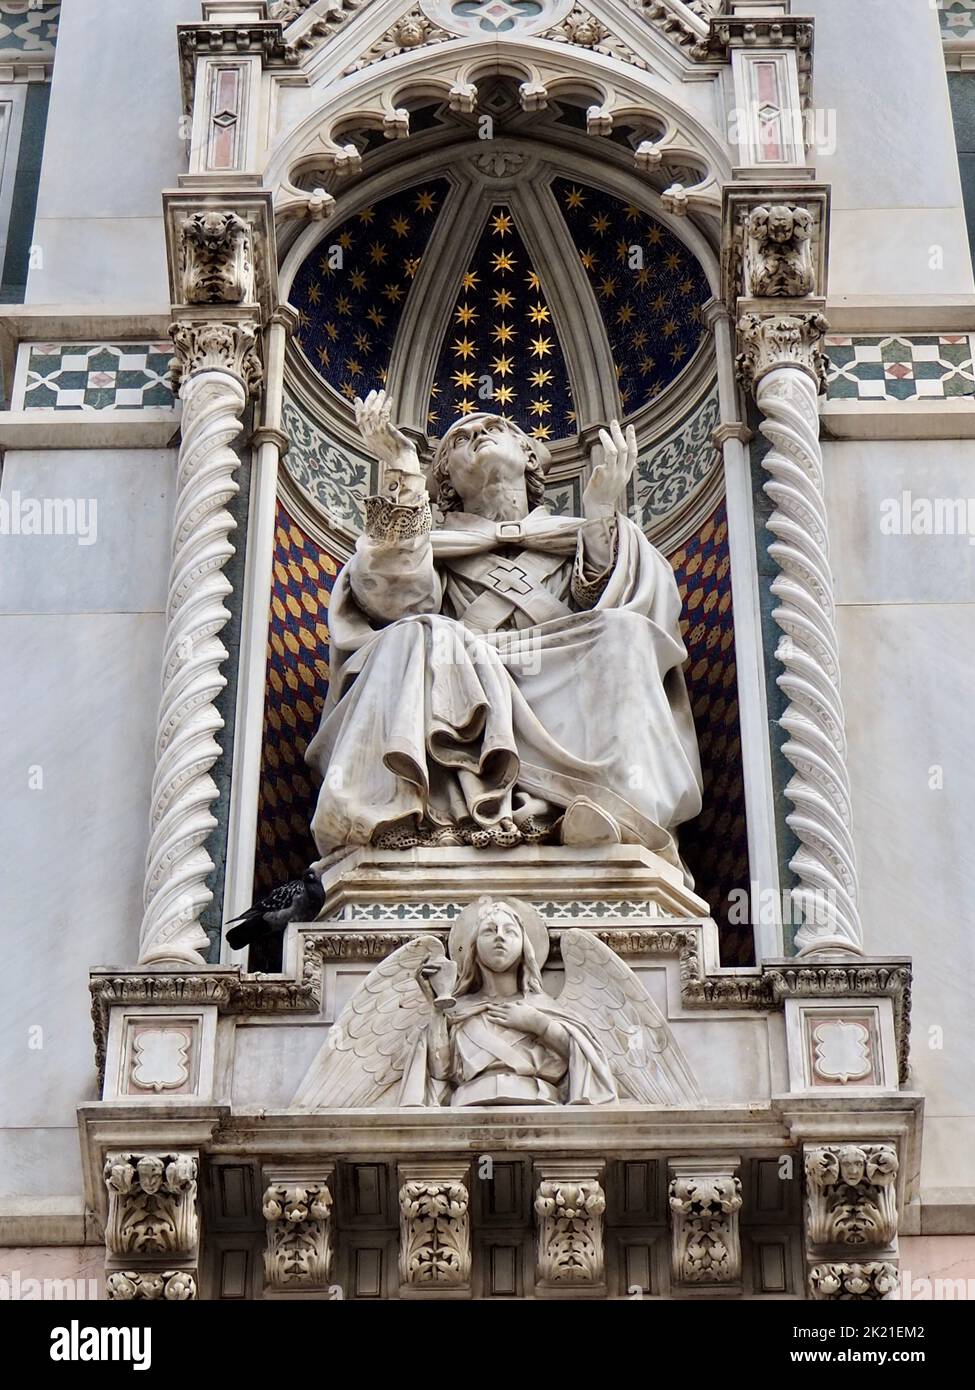 A statue on the frontal facade of the Cathedral of Santa Maria del Fiore Stock Photo